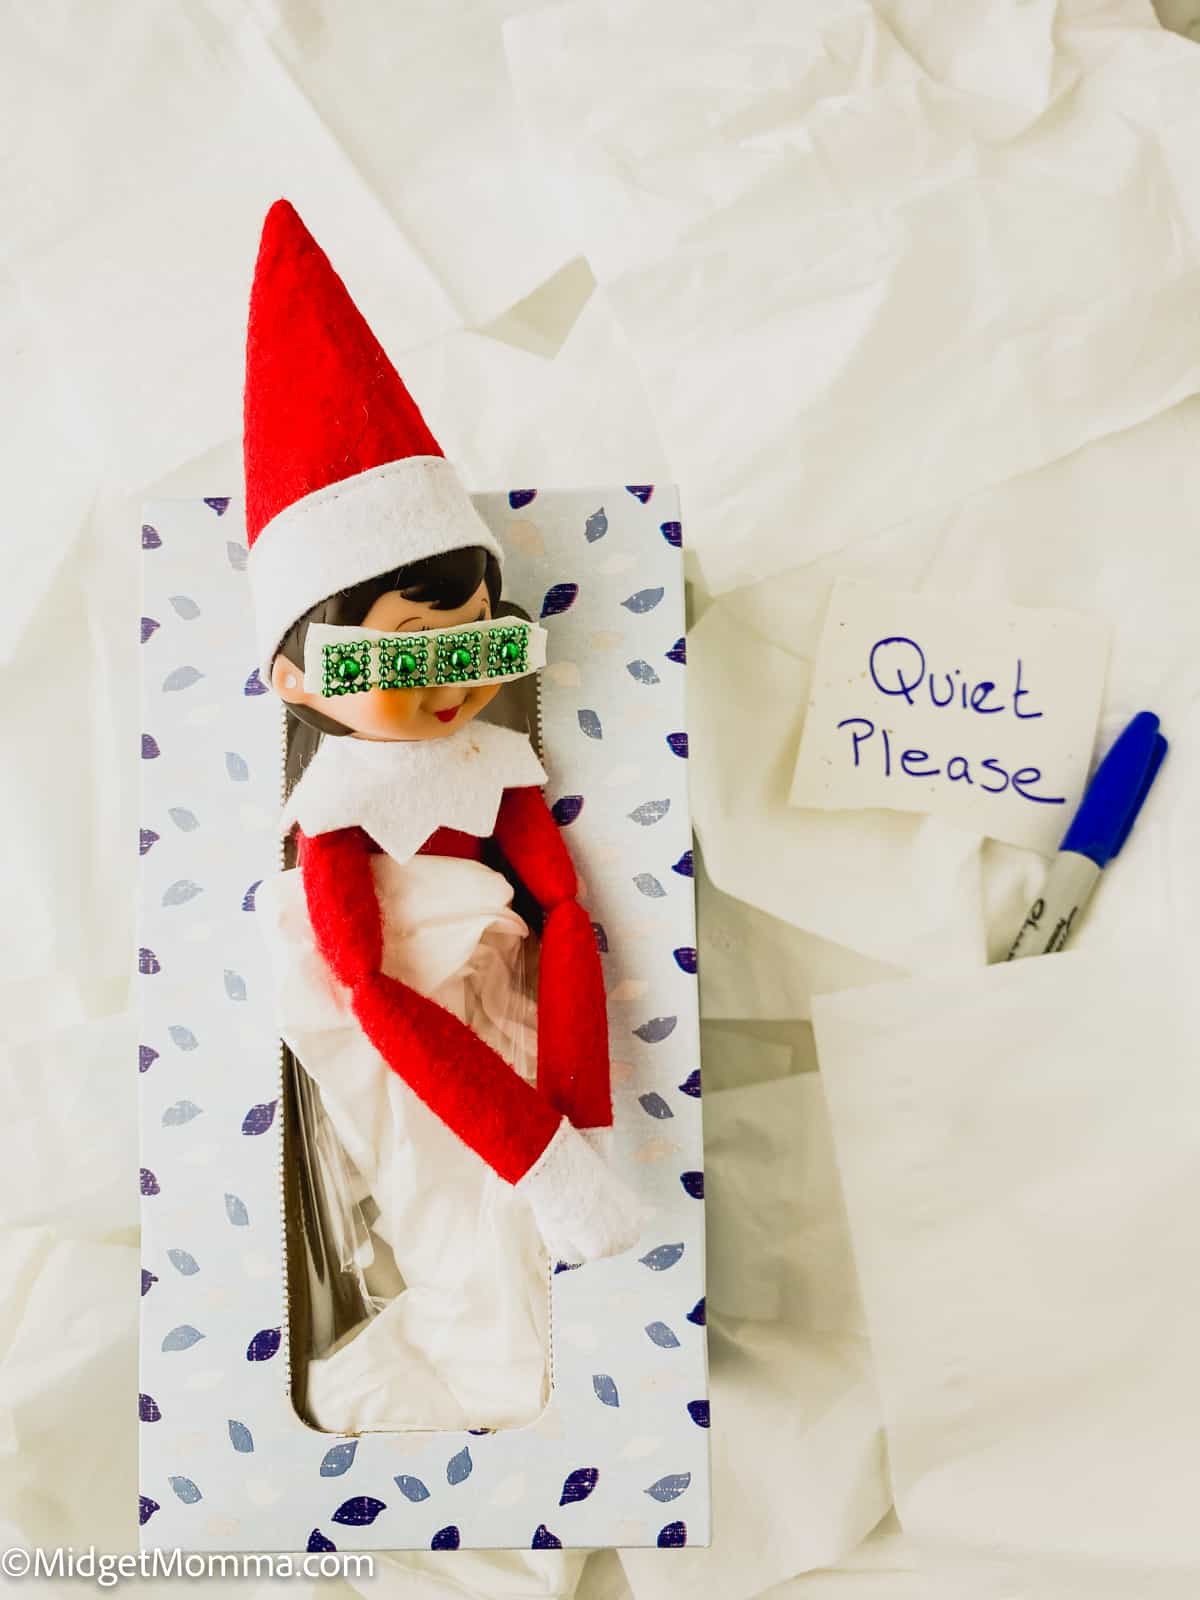 An elf in a box with a sign that says quit please.